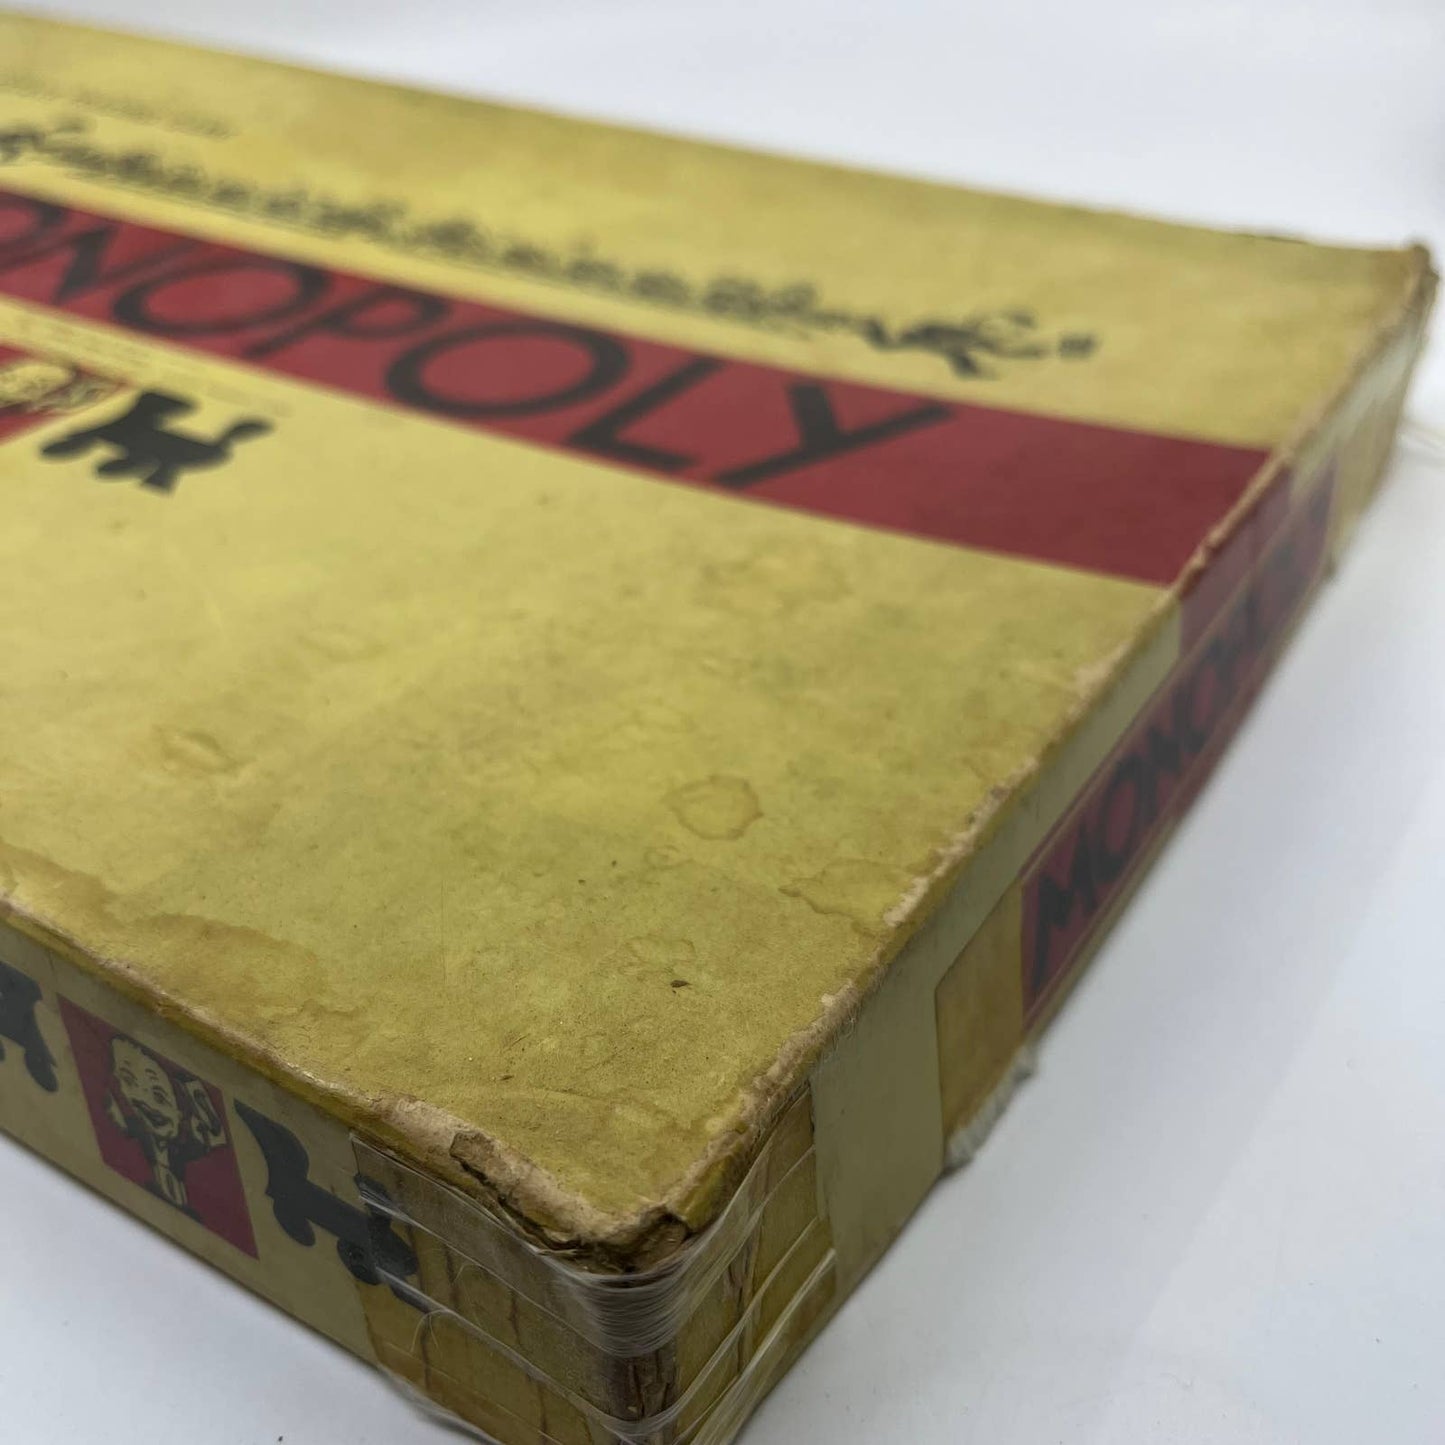 Vintage Monopoly 1954 Board Game Yellow Box W/ Complete Wooden Pieces TG7